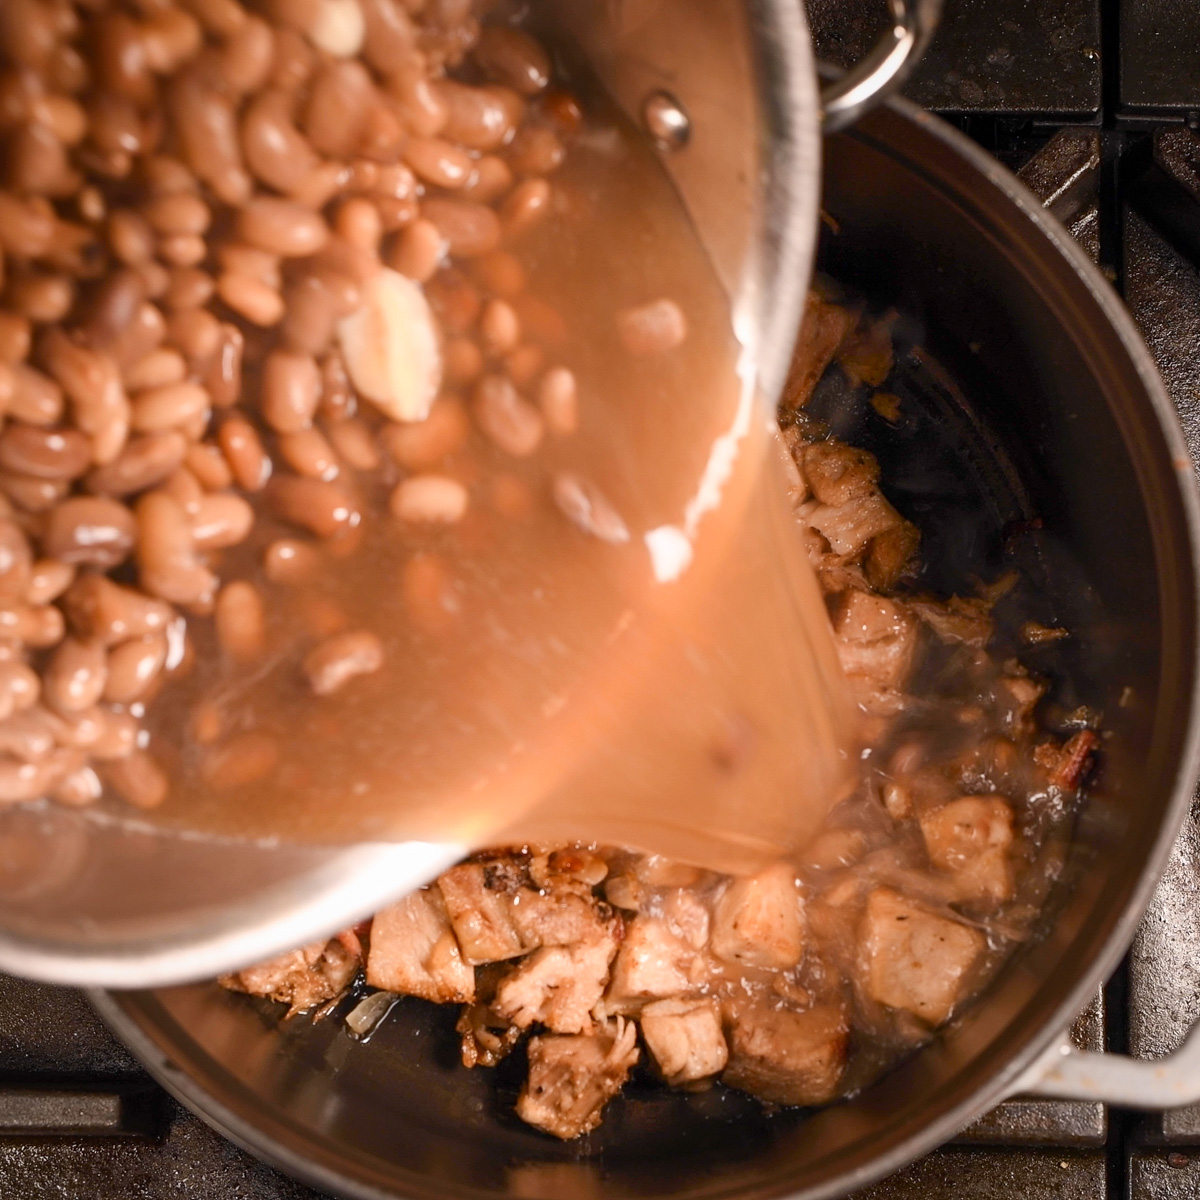 Add beans to carnitas, onion and bacon.